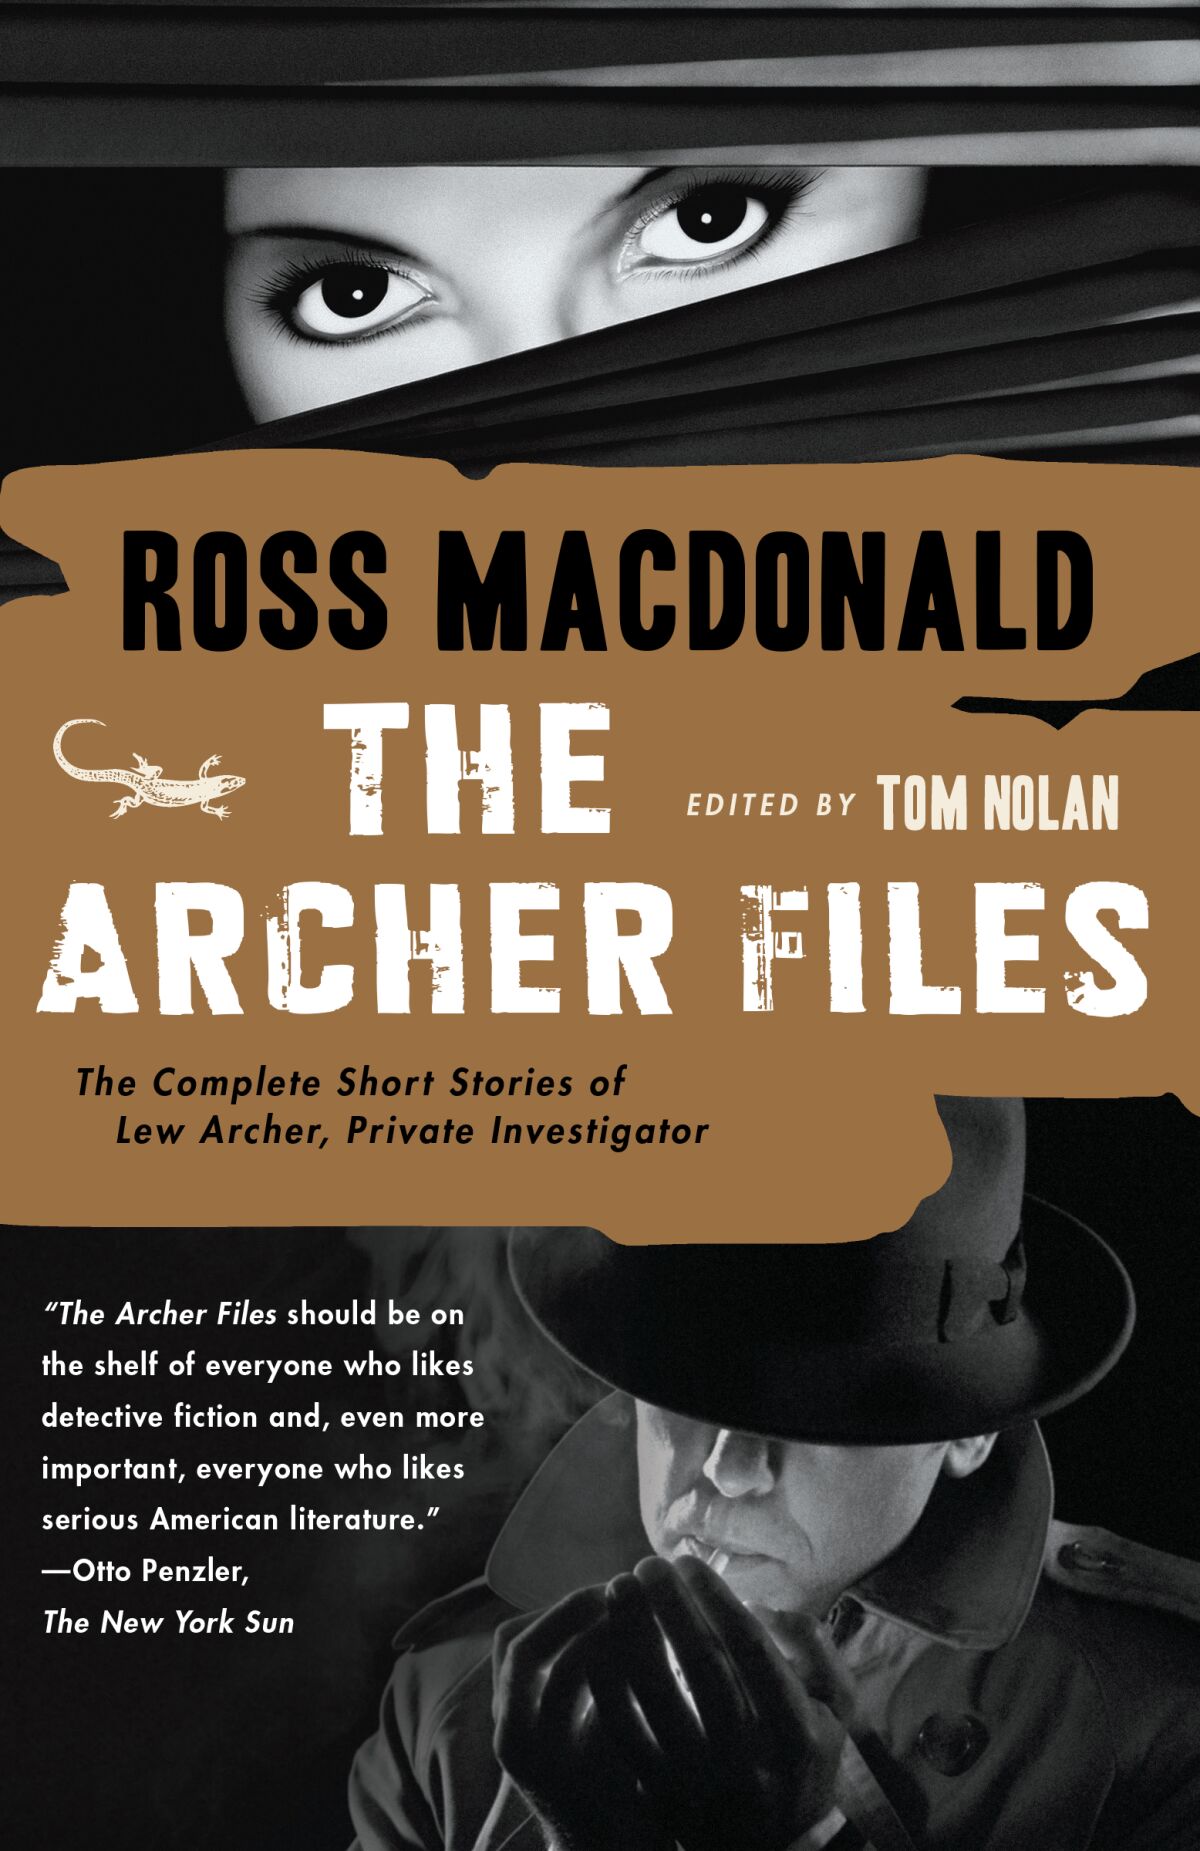 Book jacket for "The Archer Files:The Complete Short Stories of Lew Archer, Private Invesitgator" by Ross Macdonald.